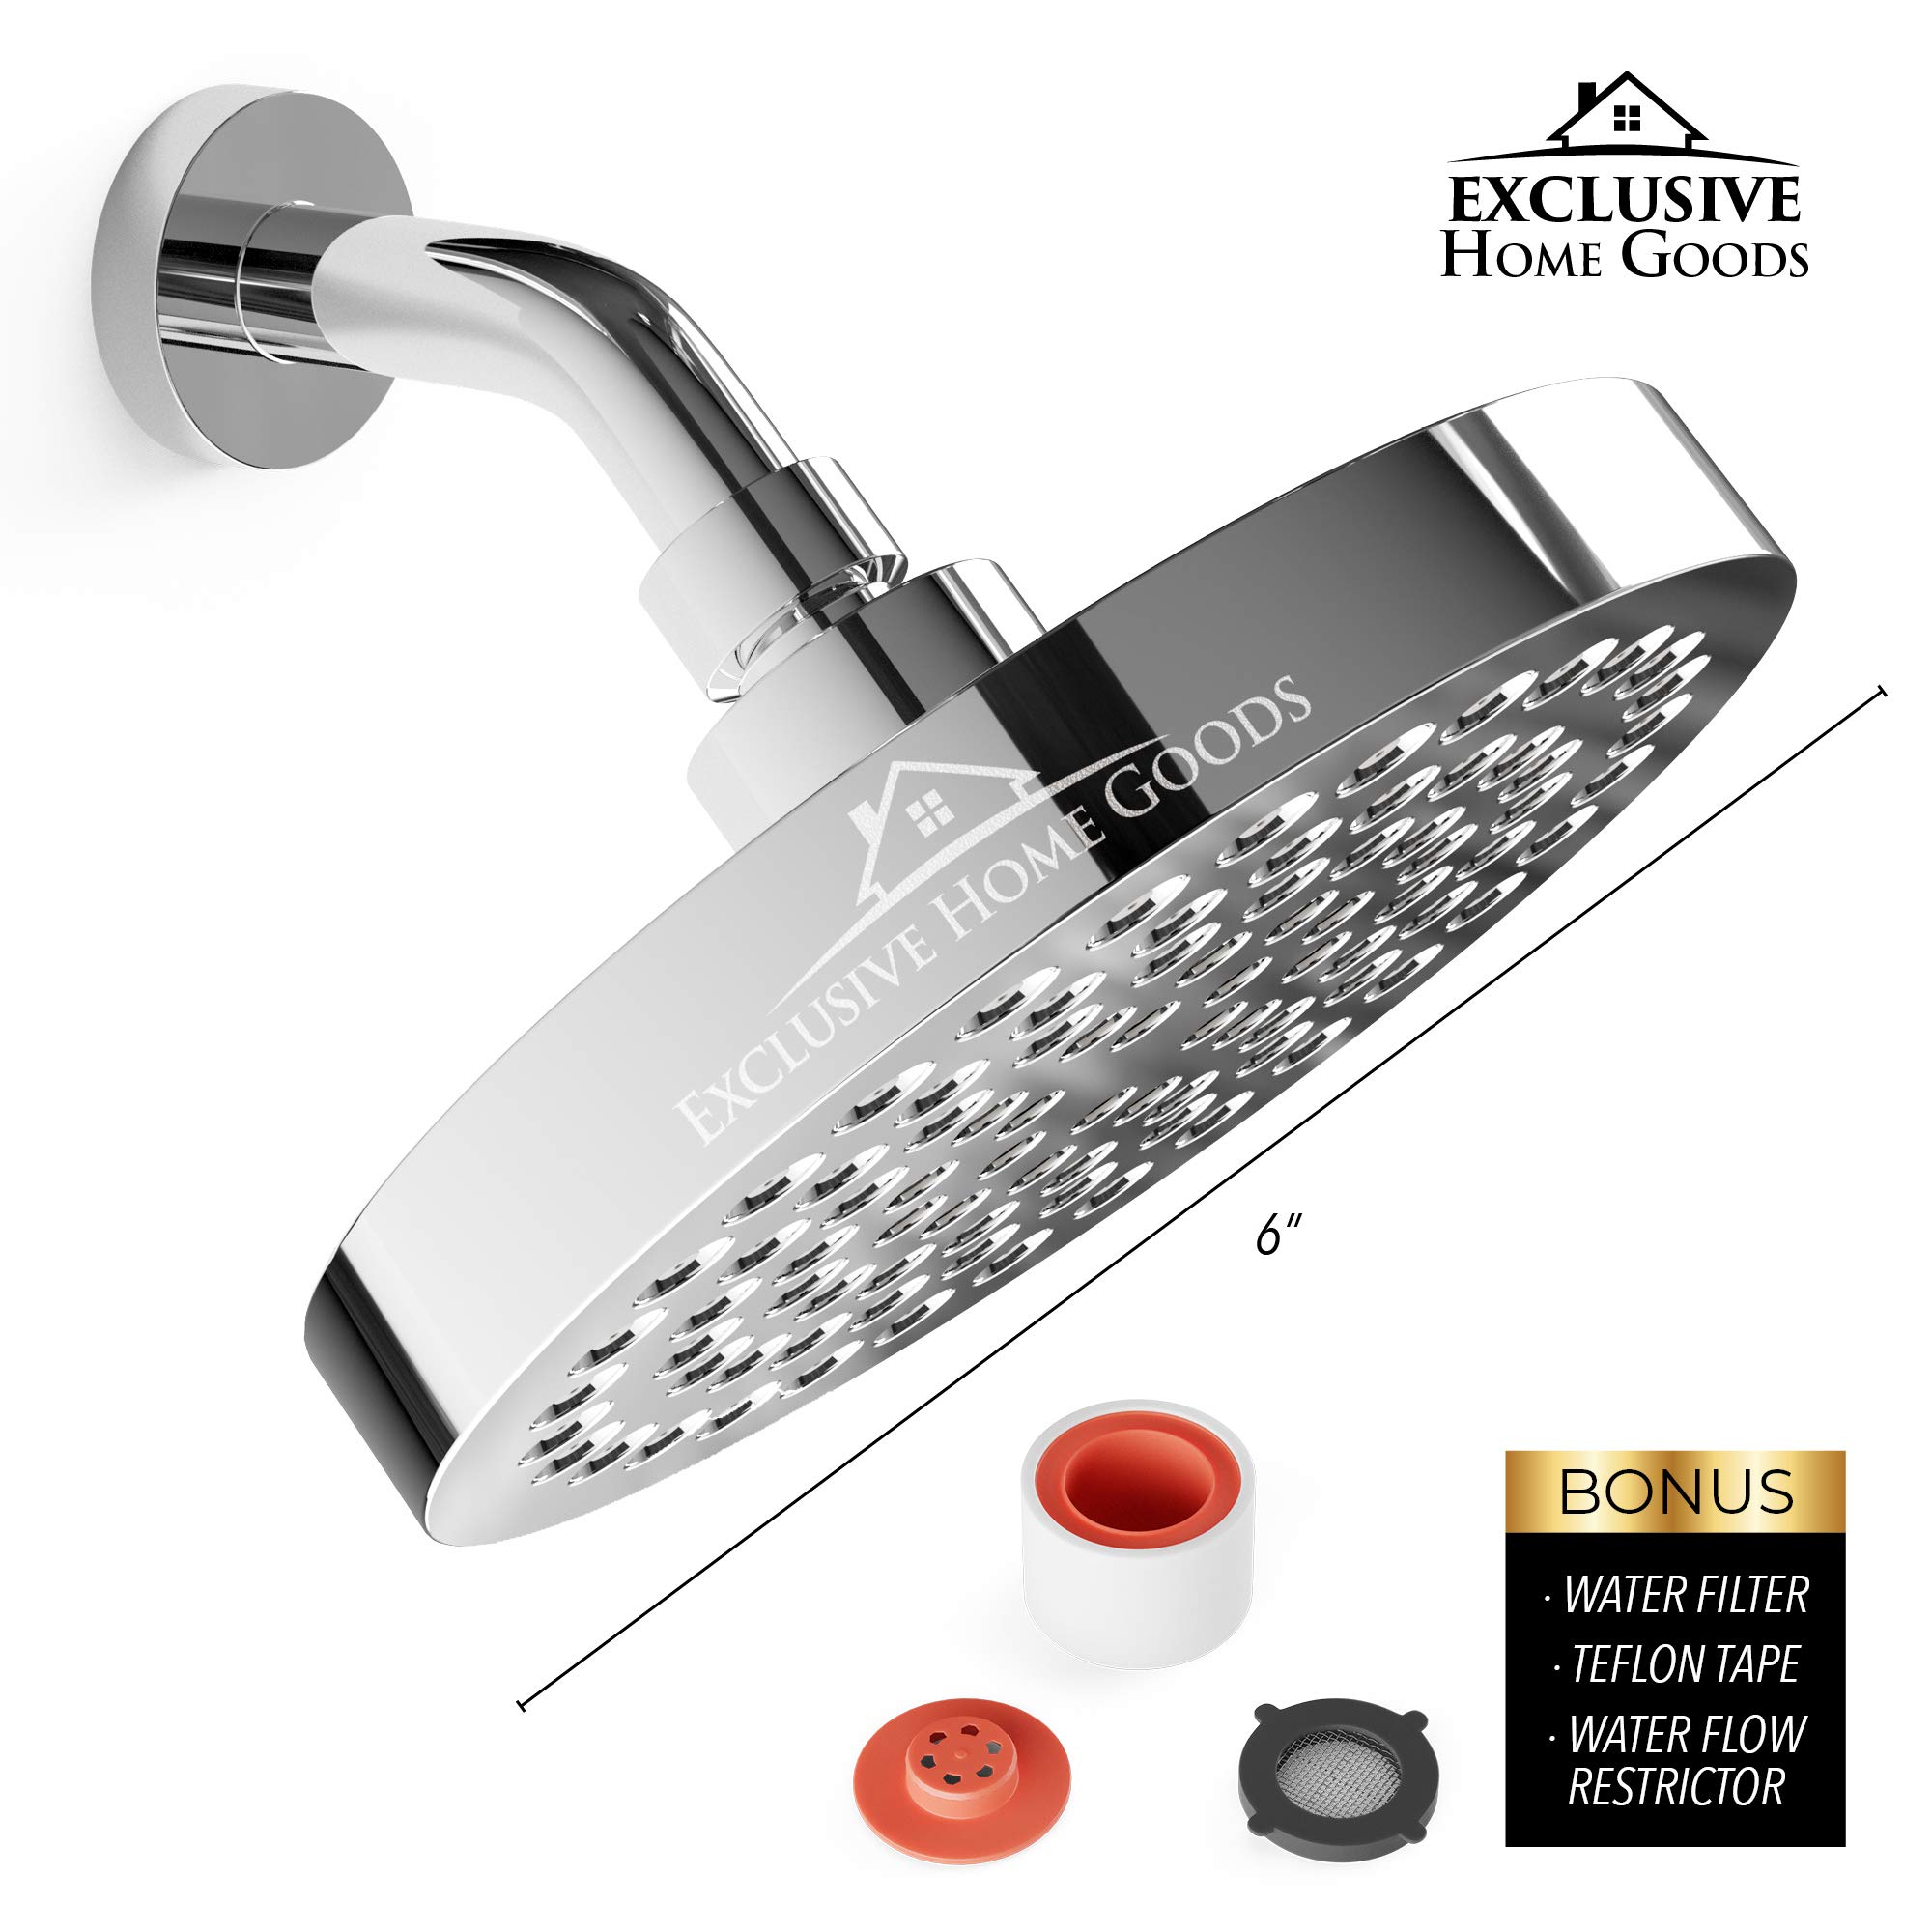 Luxury Rainfall Shower Head - High-Pressure showerhead Jets, rain shower head Ant-Clog Silicone Nozzles (1.8 GPM, Deluxe Chrome)